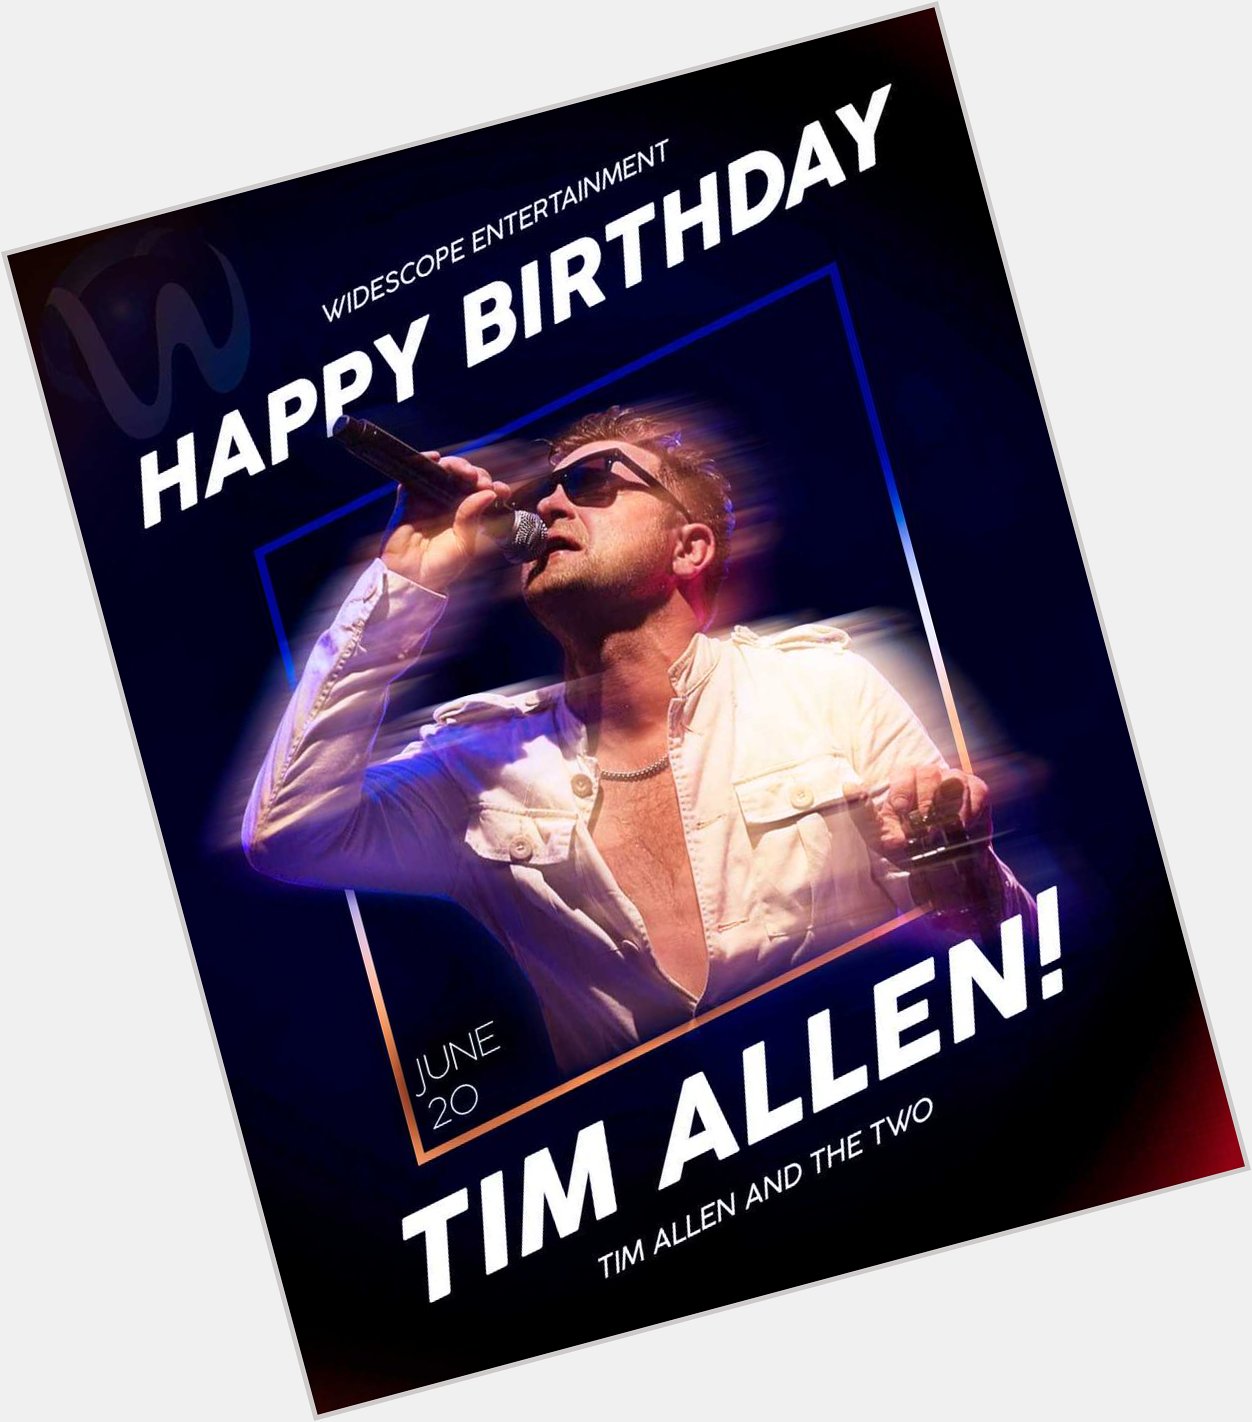 Happy Birthday Tim Allen! It s time to party like a rock star! We wish you all the best on your birthday! 